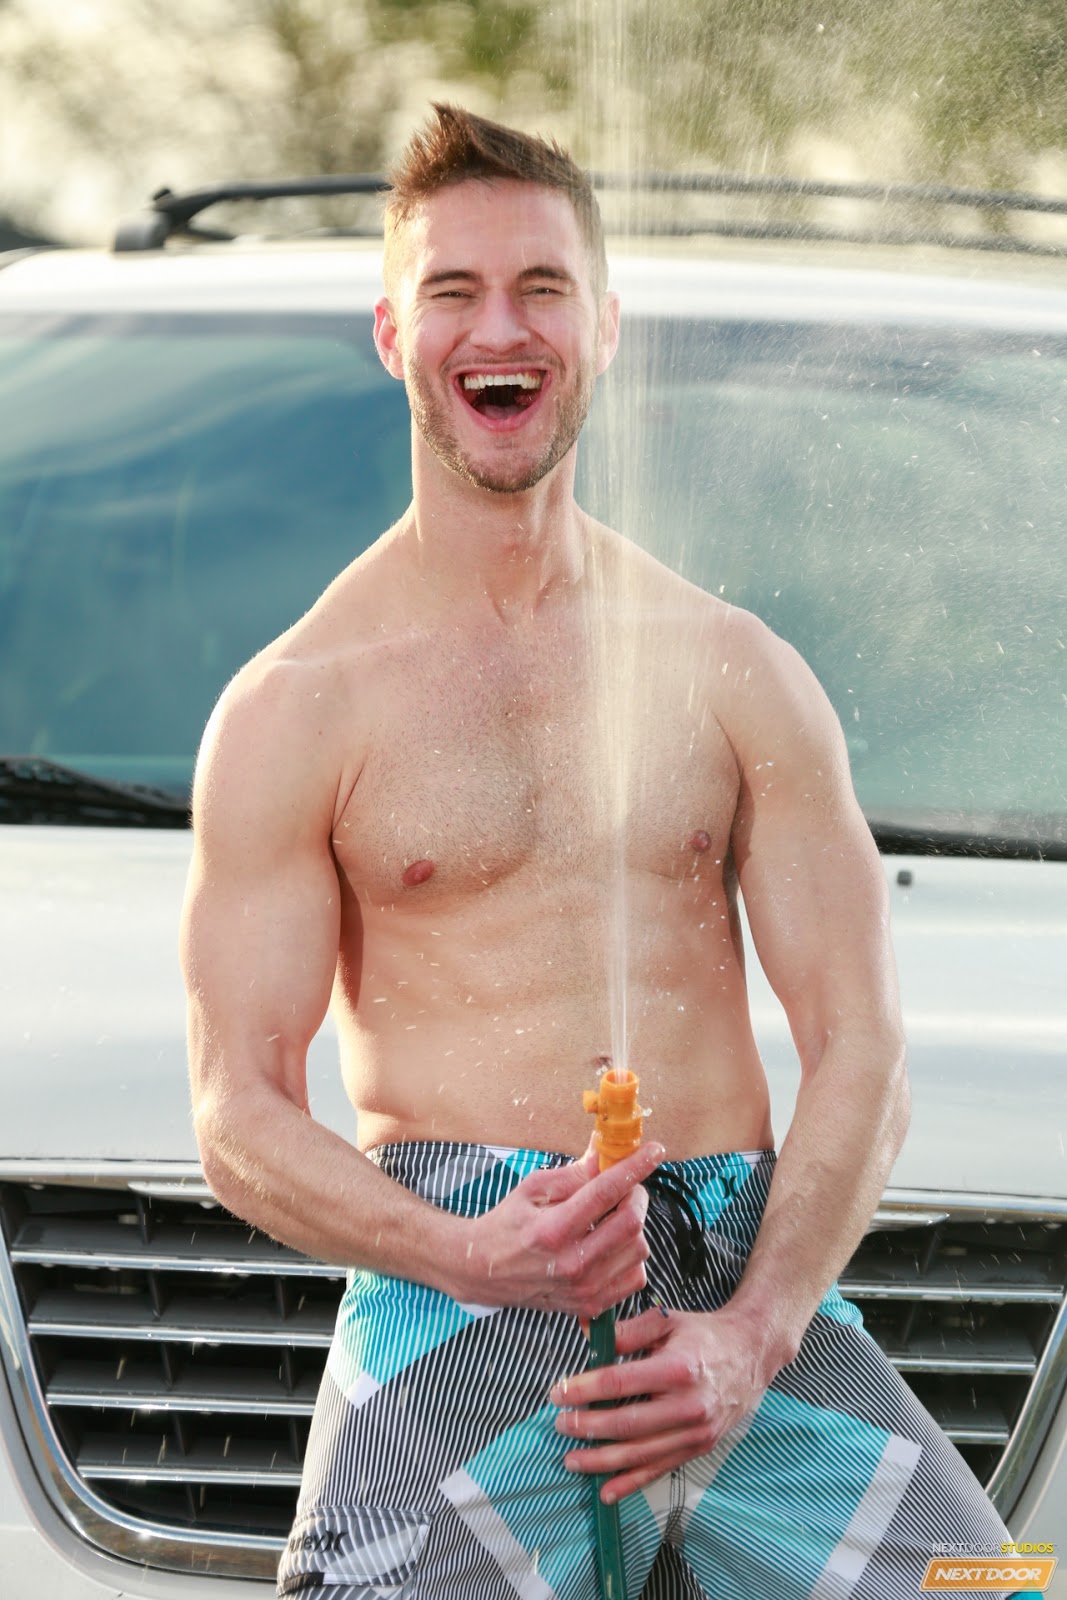 WE LOVE HOT GUYS: Car wash with two hot guys